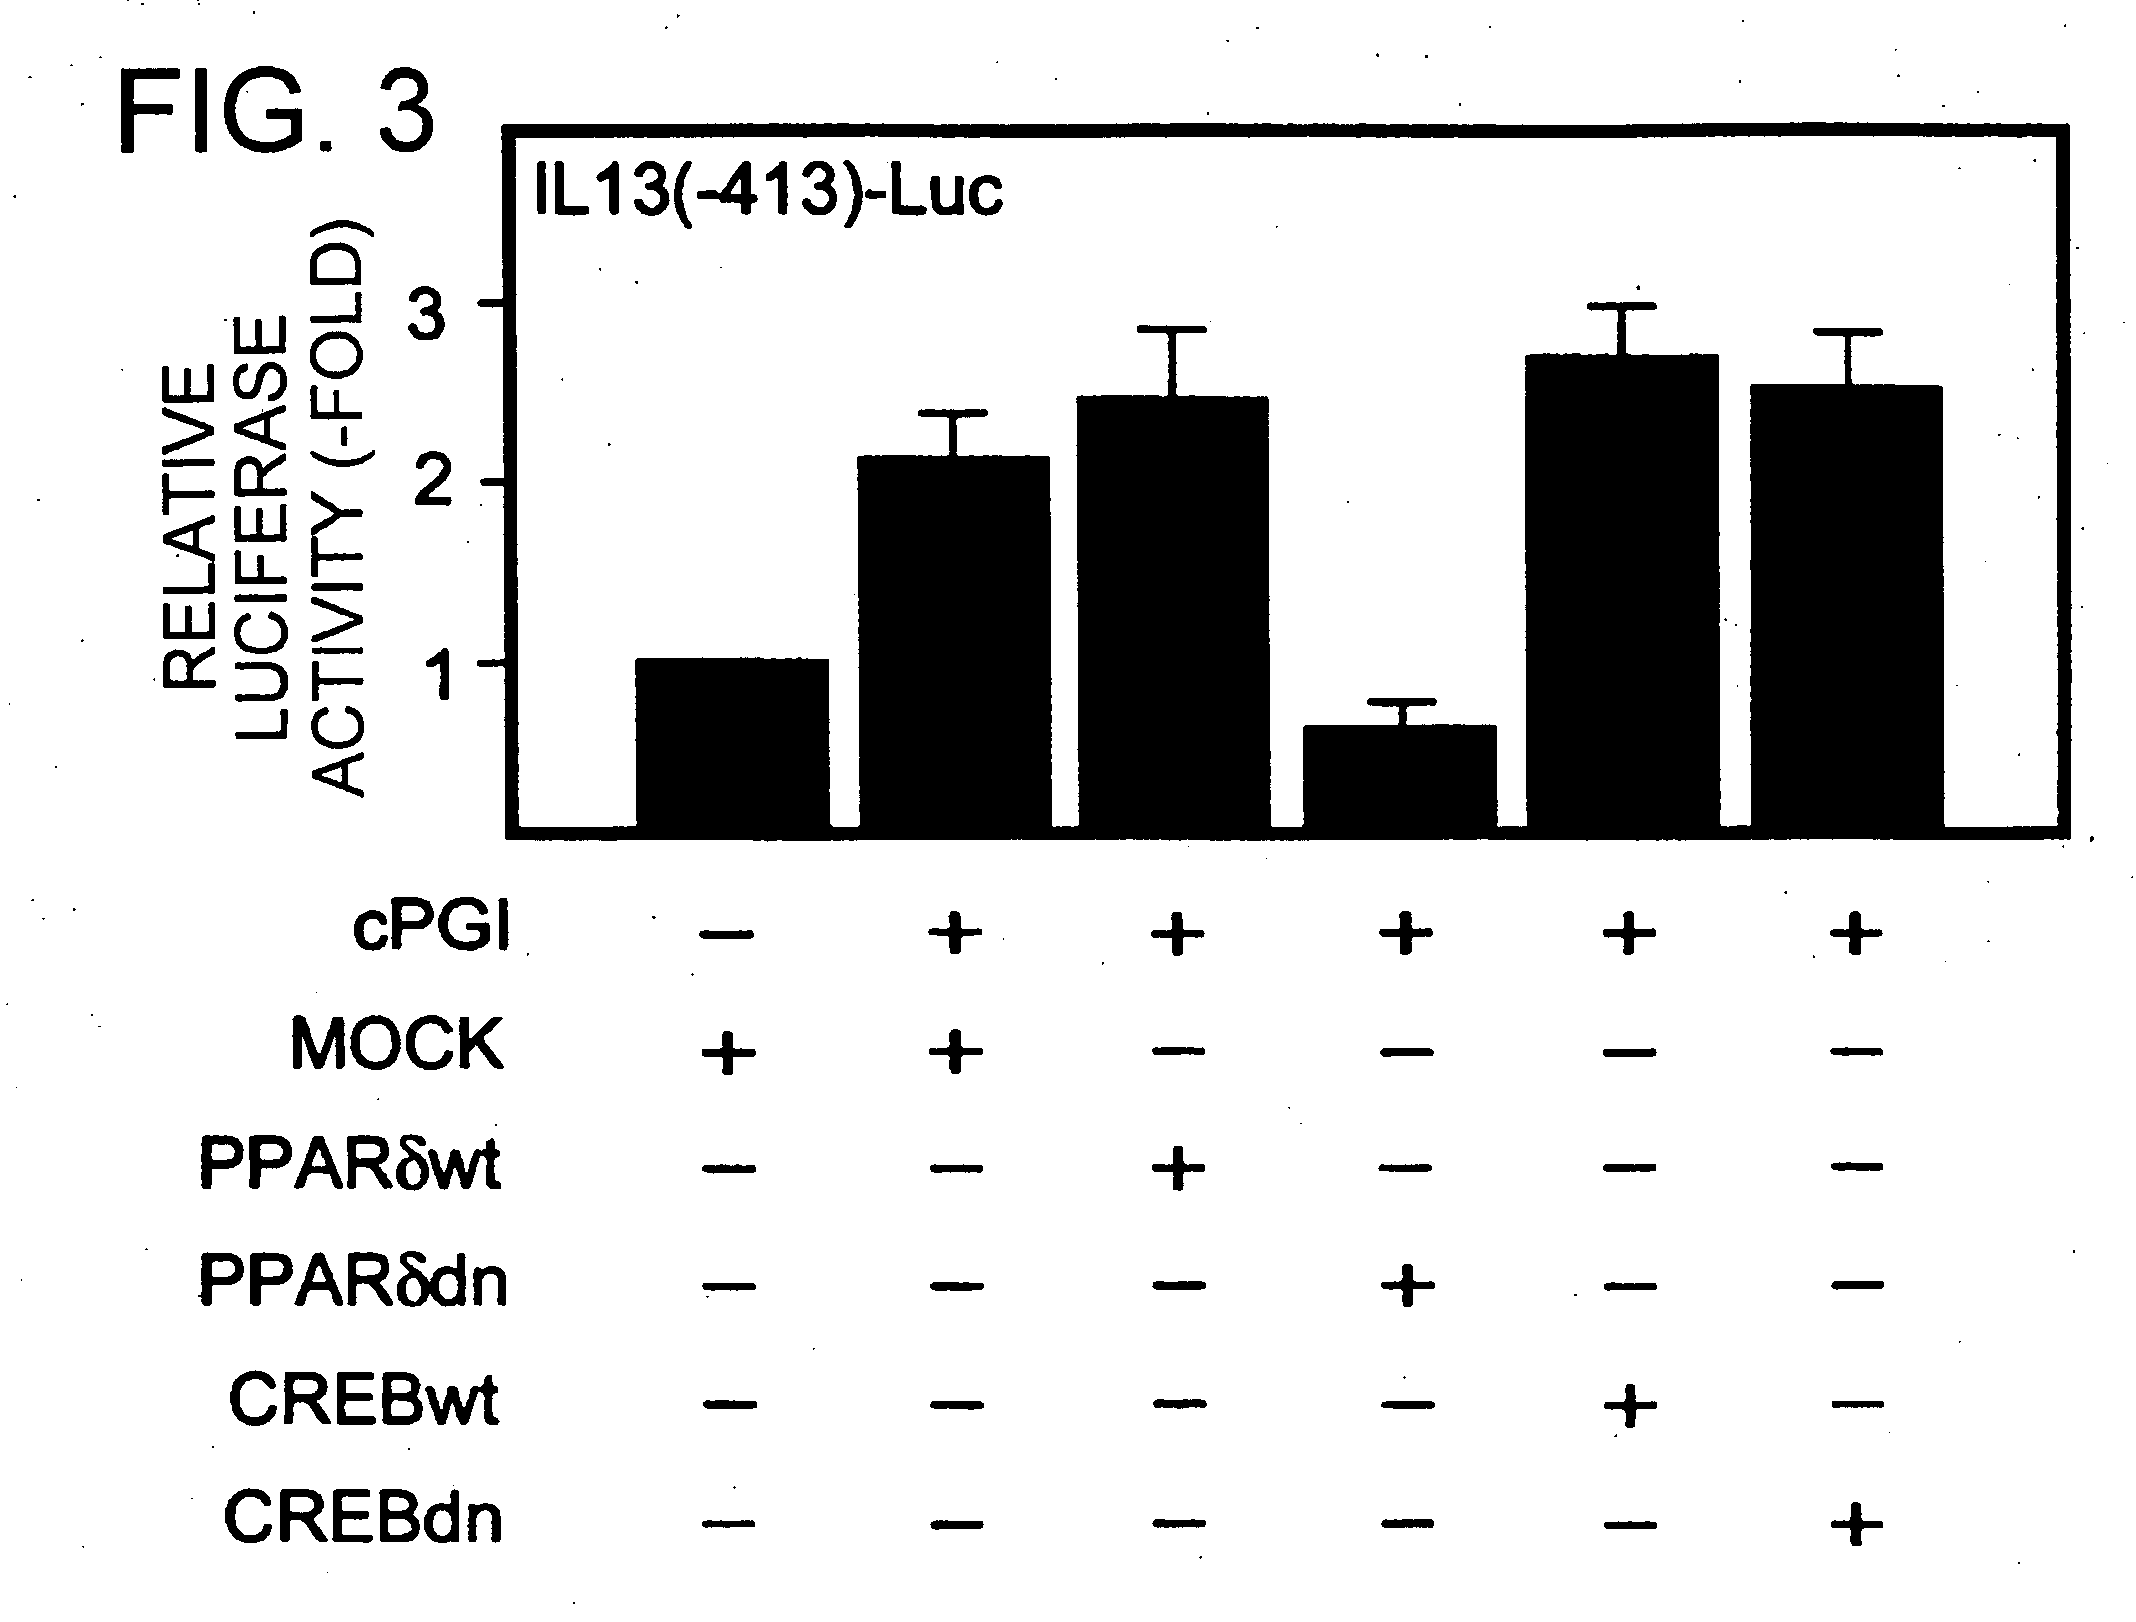 Method for treating or preventing inflammatory disorders